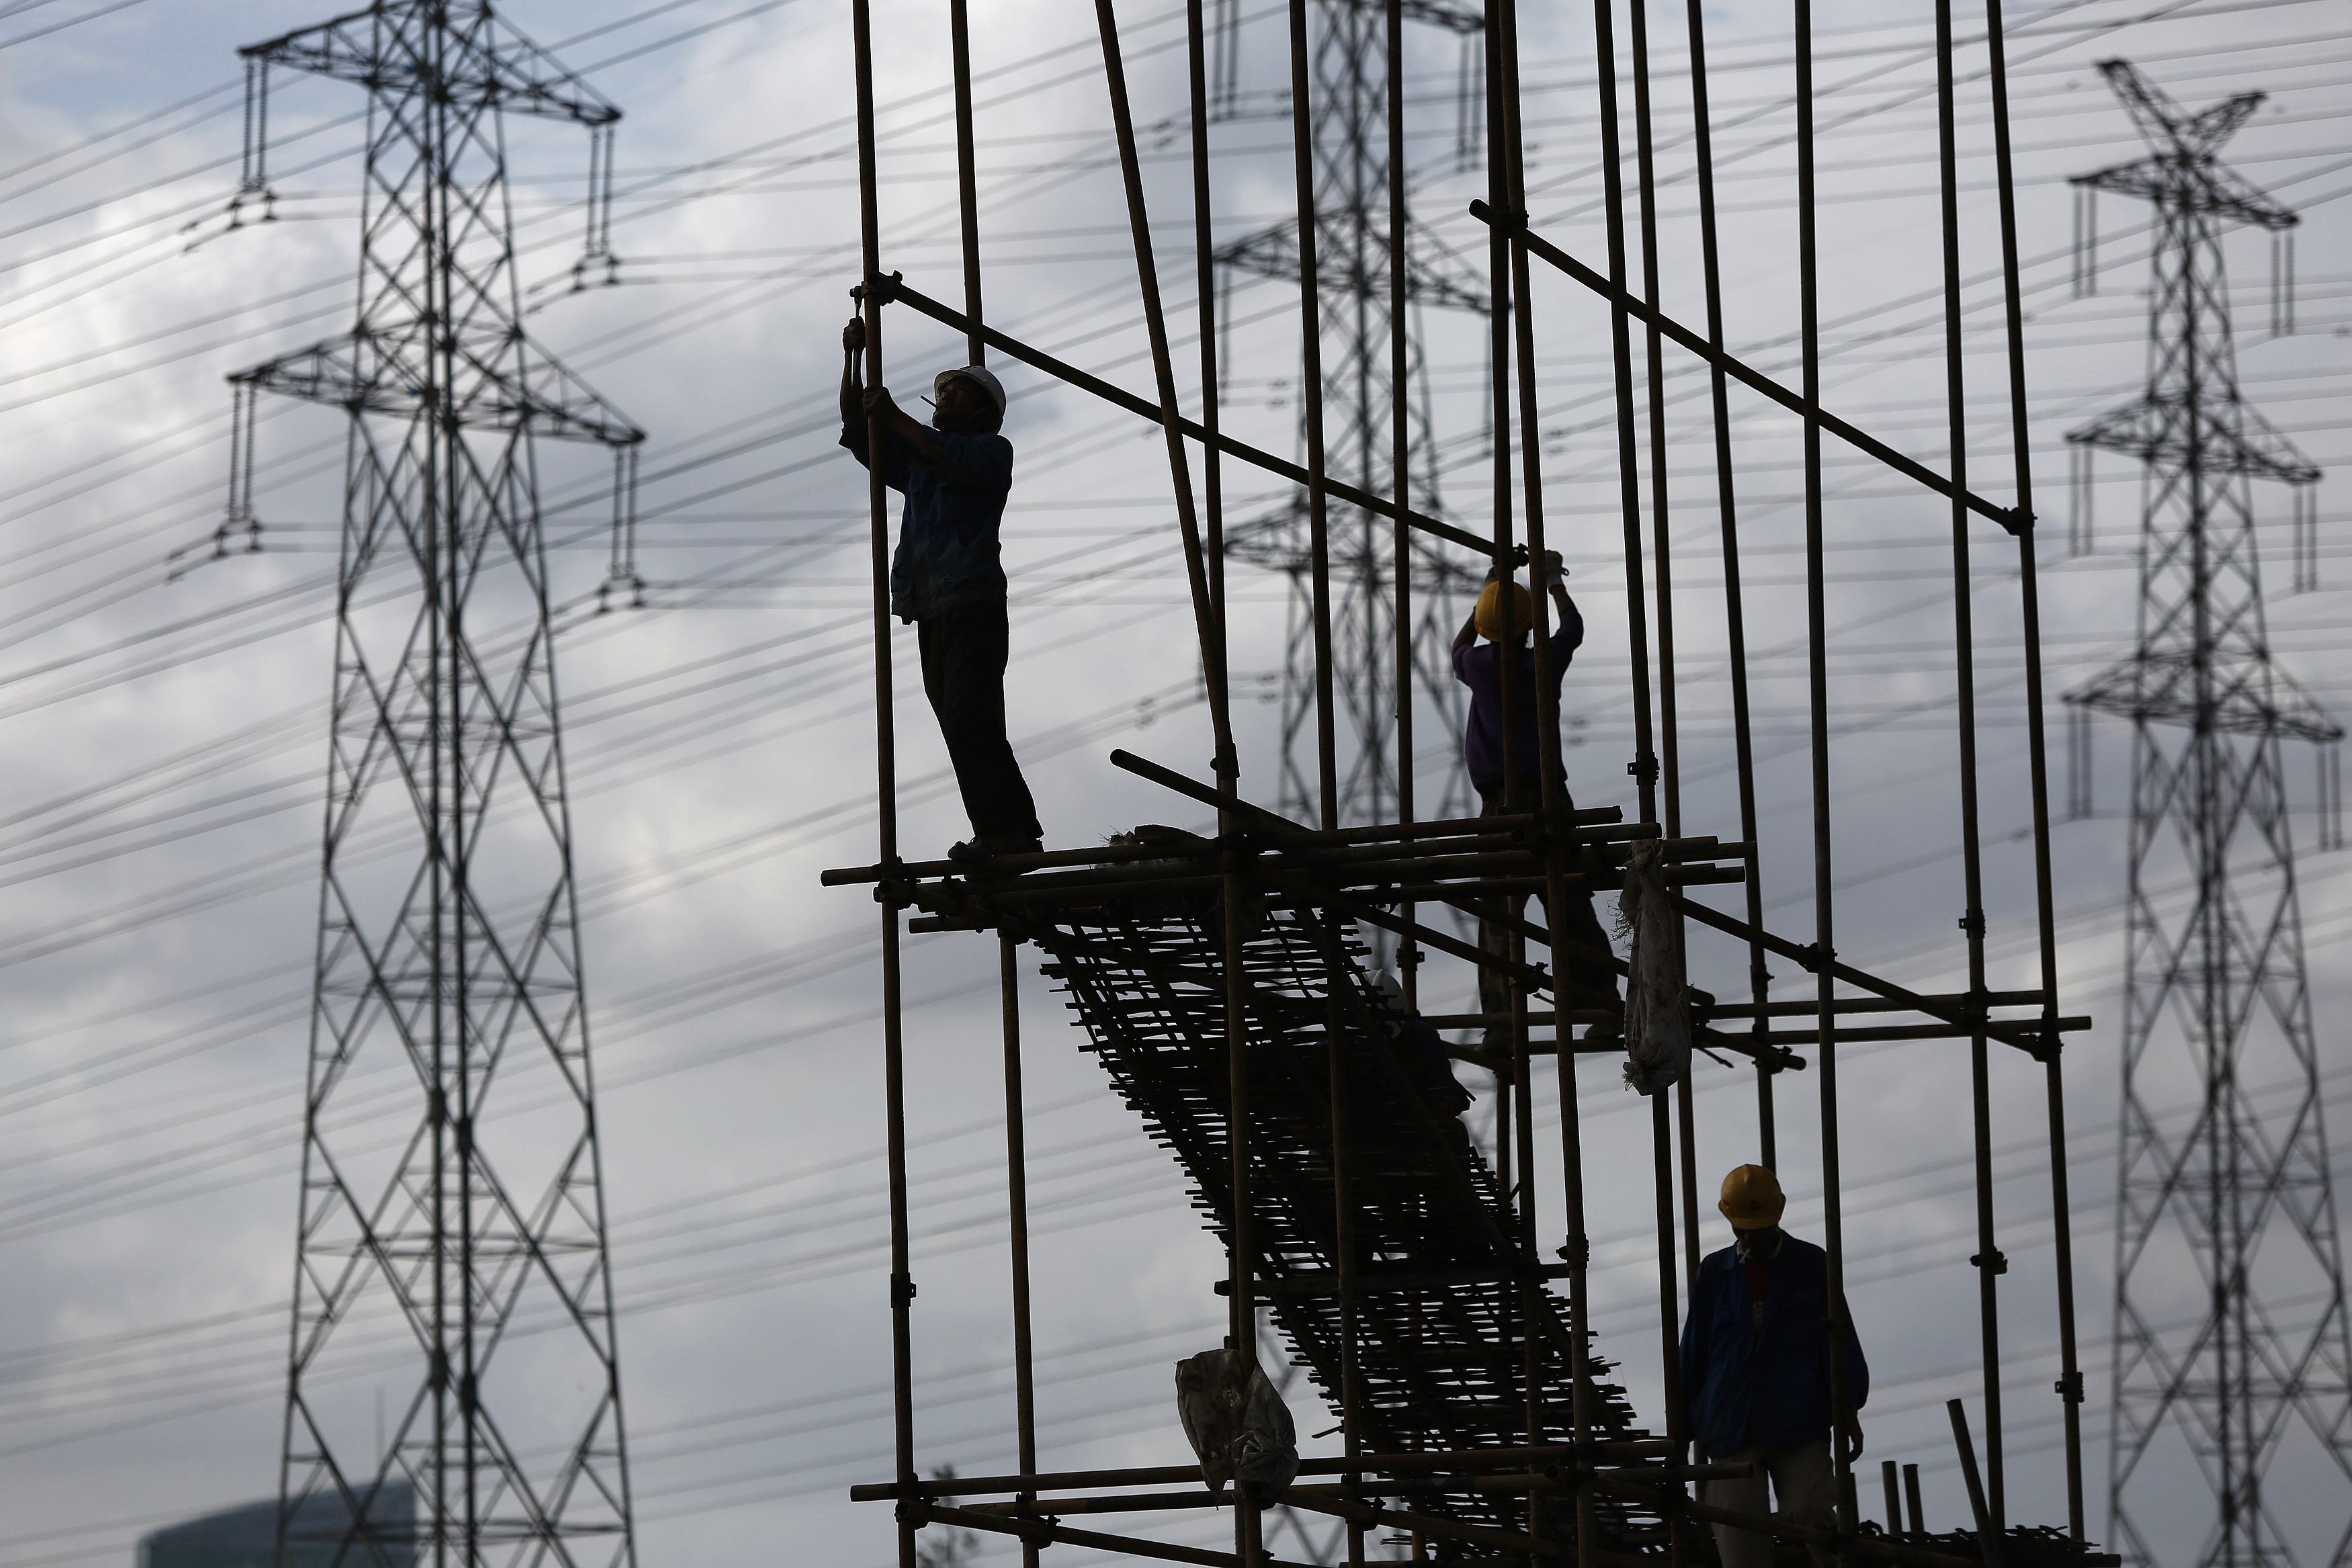 Construction workers stand on scaffolding in front of high voltage power lines in Shanghai